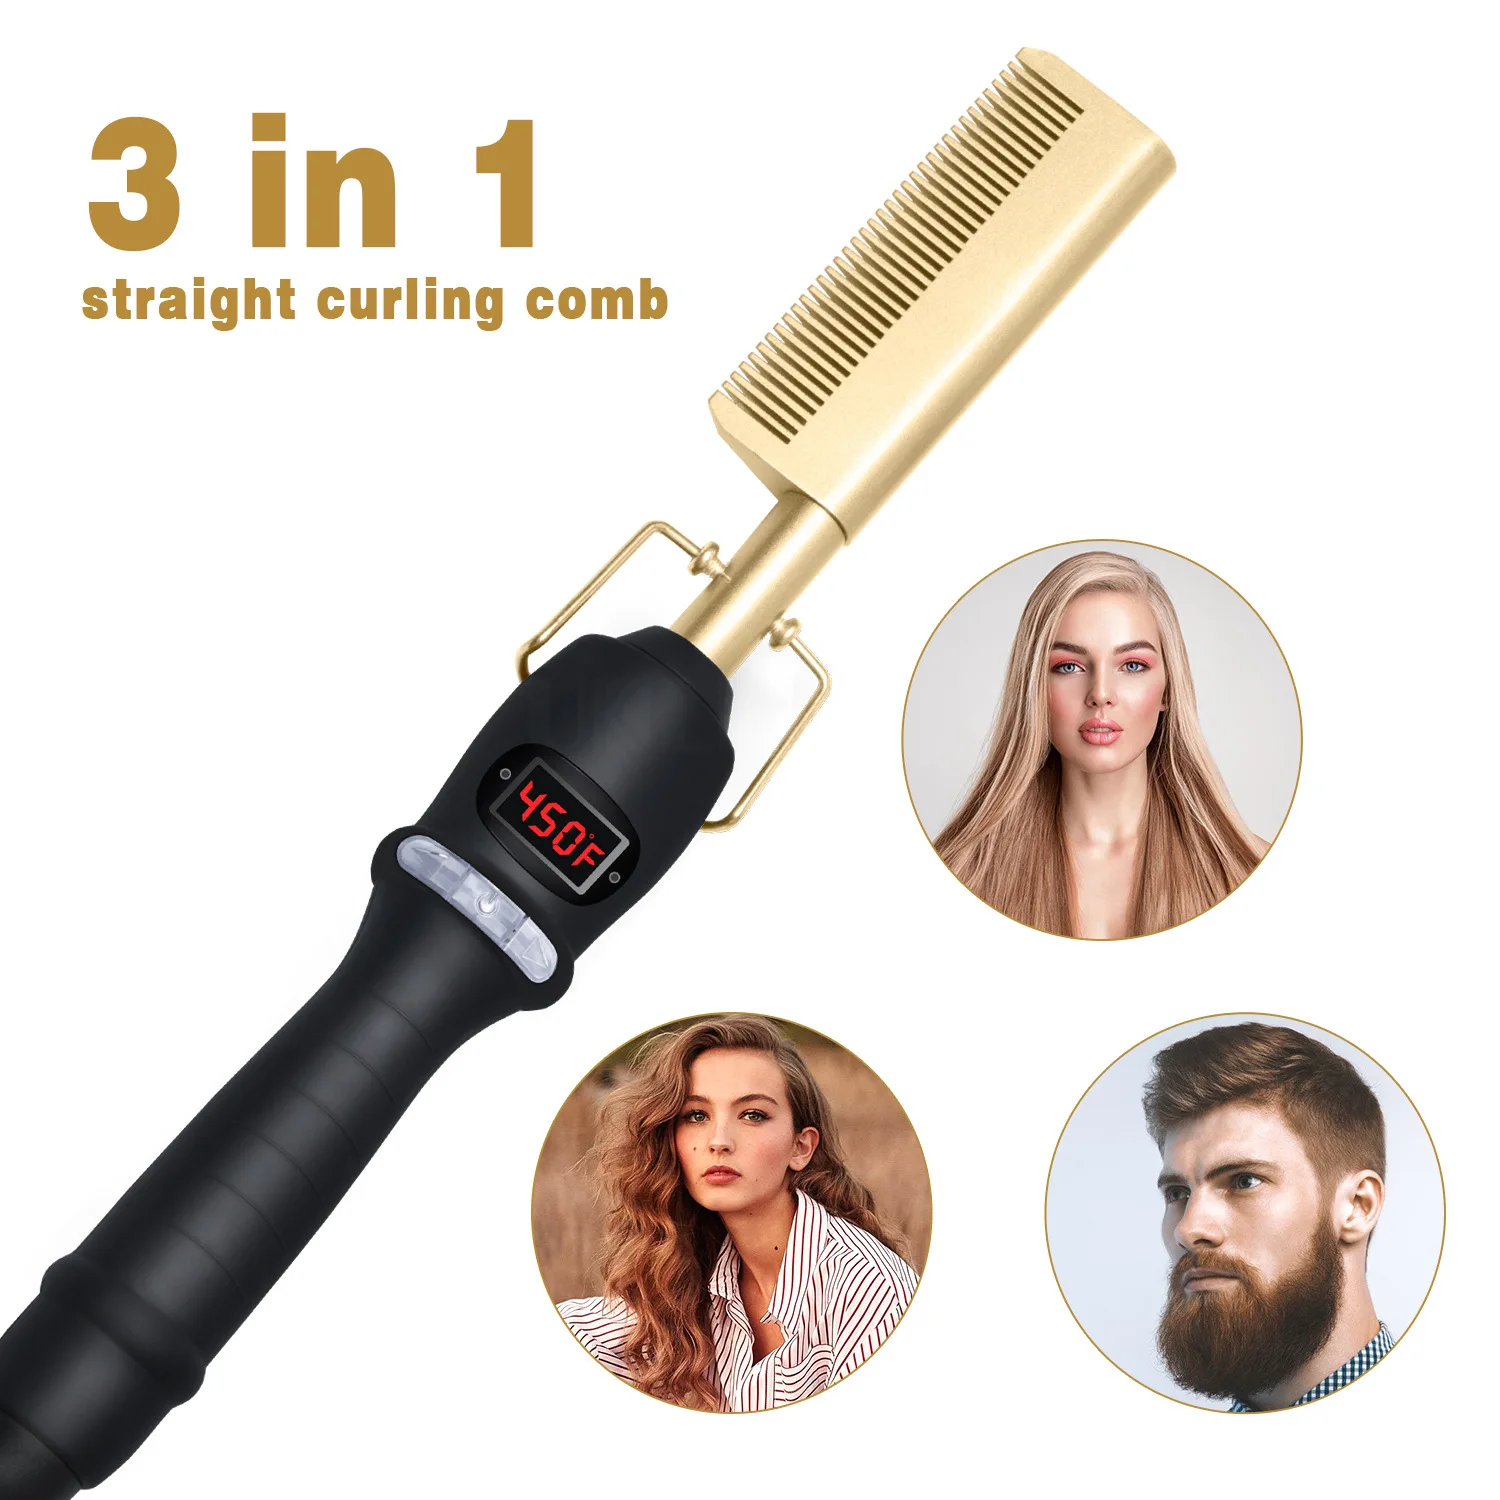 

3 in 1 Hot Comb Straightener Electric Hair Straightener For Hair Curler Wet Dry Use Straight Styler Beard & Mustache Combs